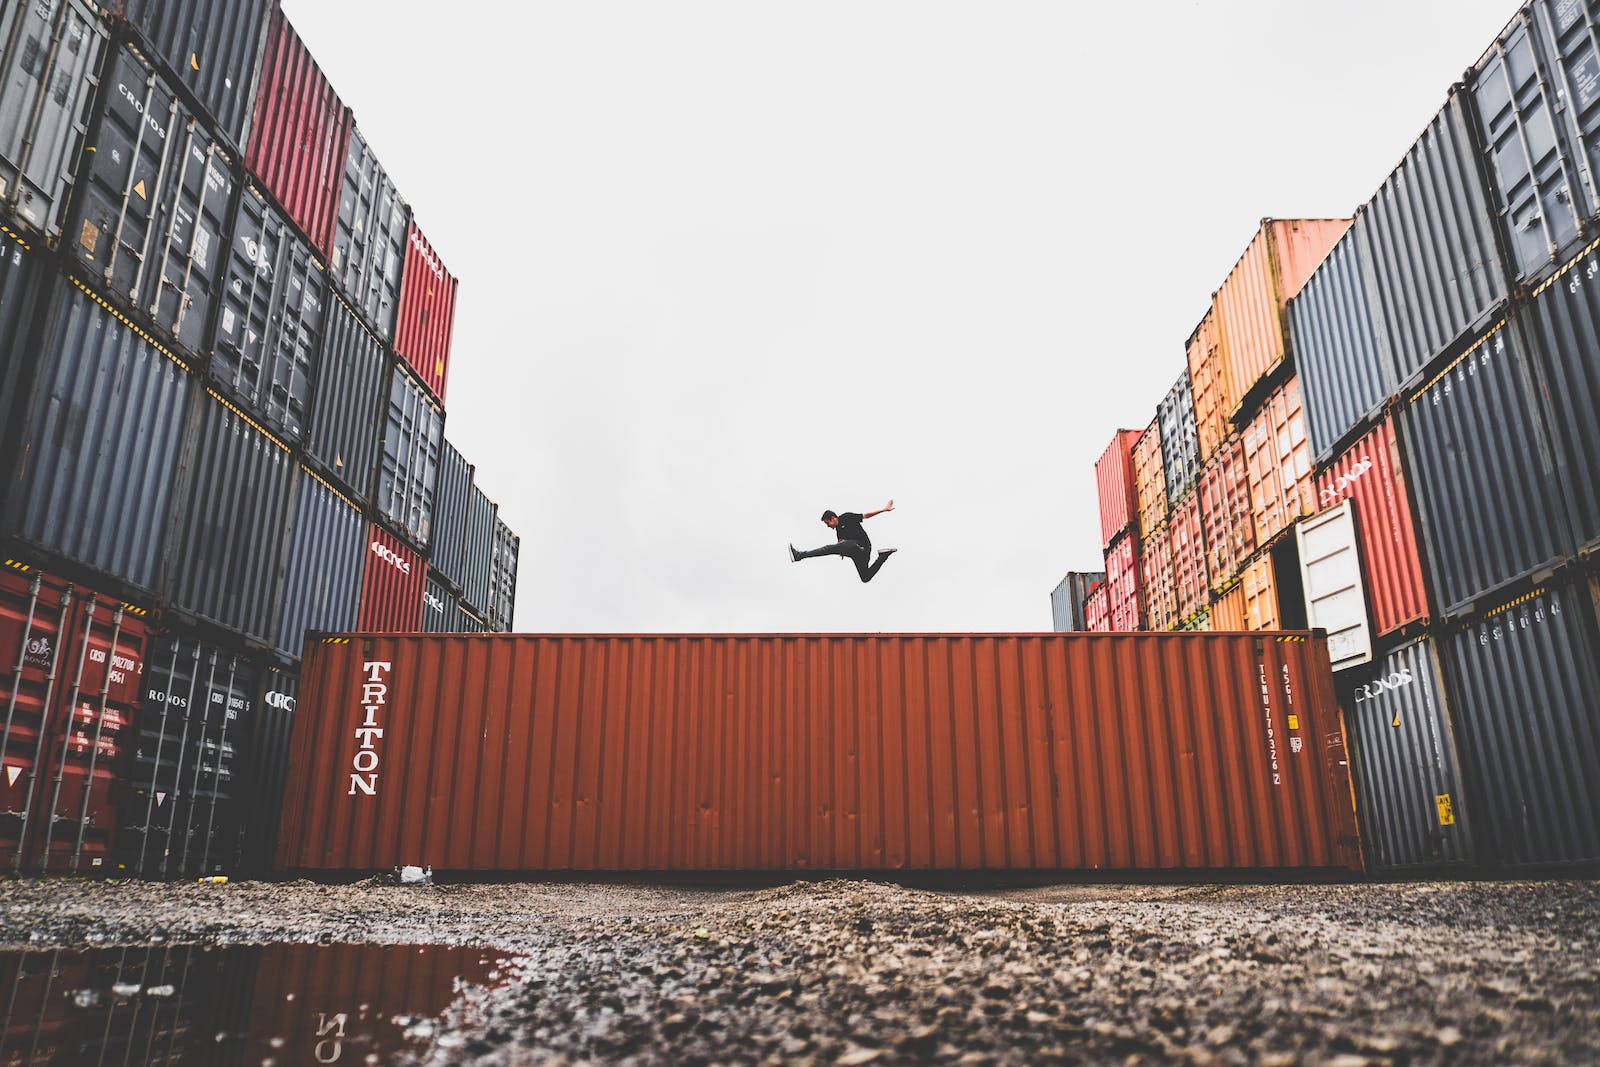 Freight Container Jumping